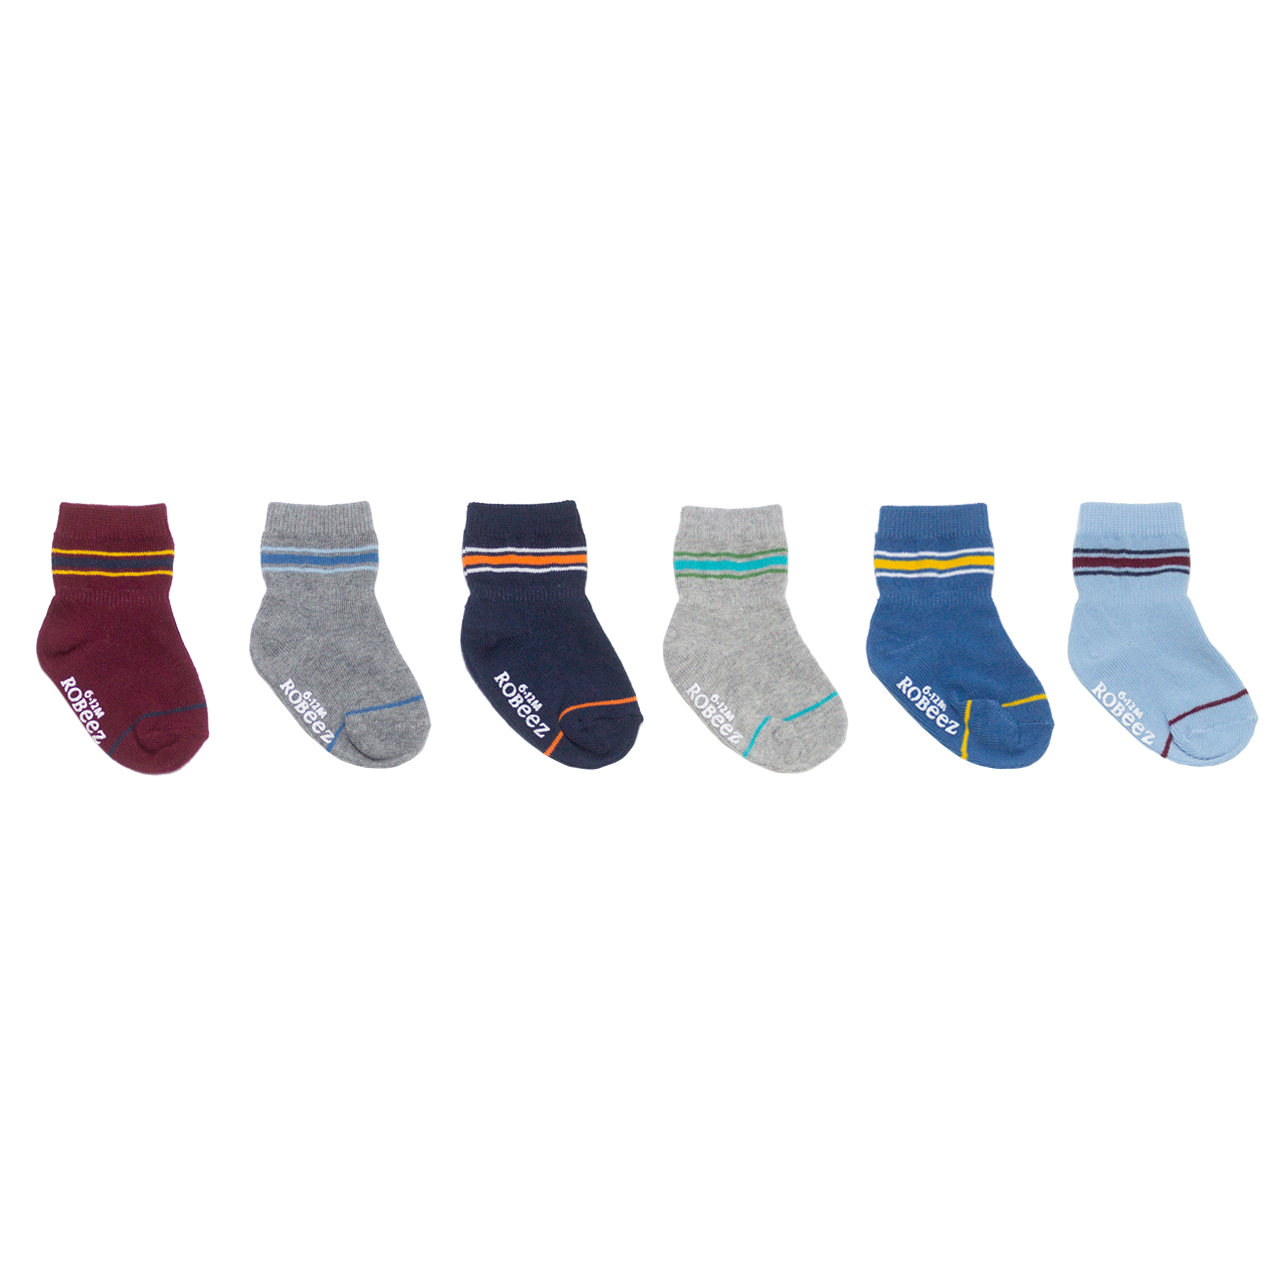 Solid Crew 6-Pack Socks Black for Toddlers and Kids